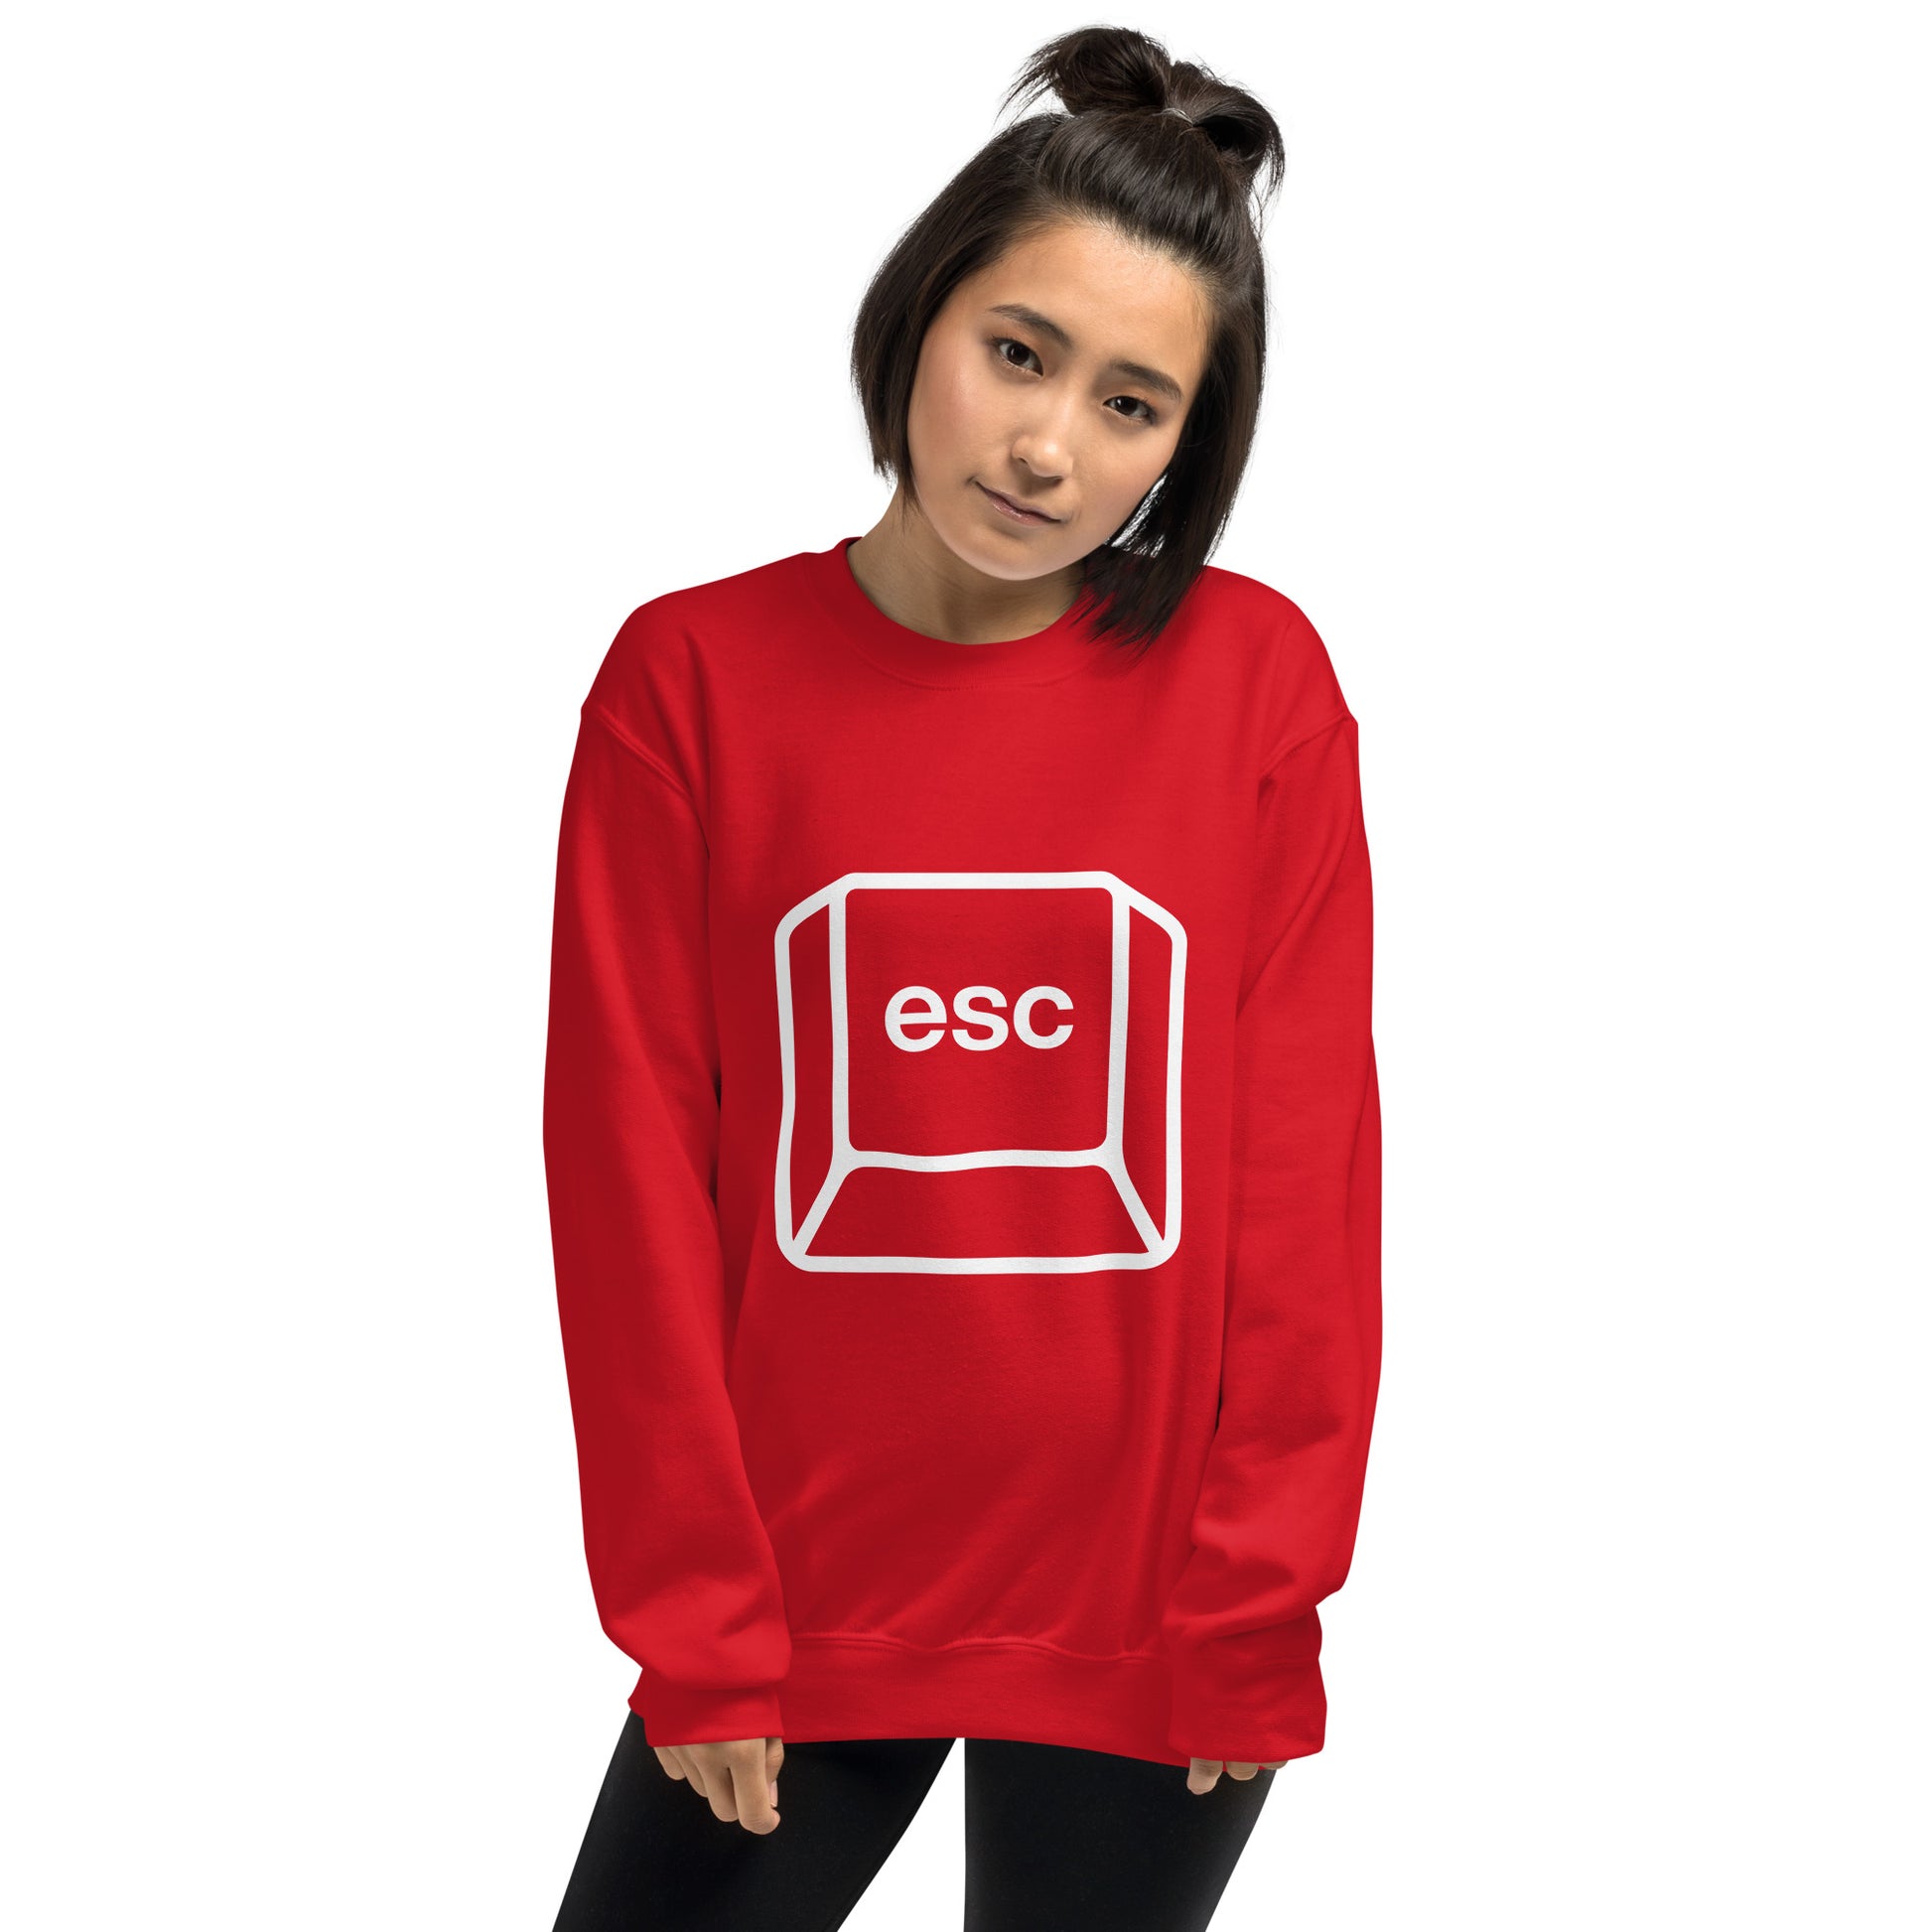 Woman with red sweatshirt with picture of esc key